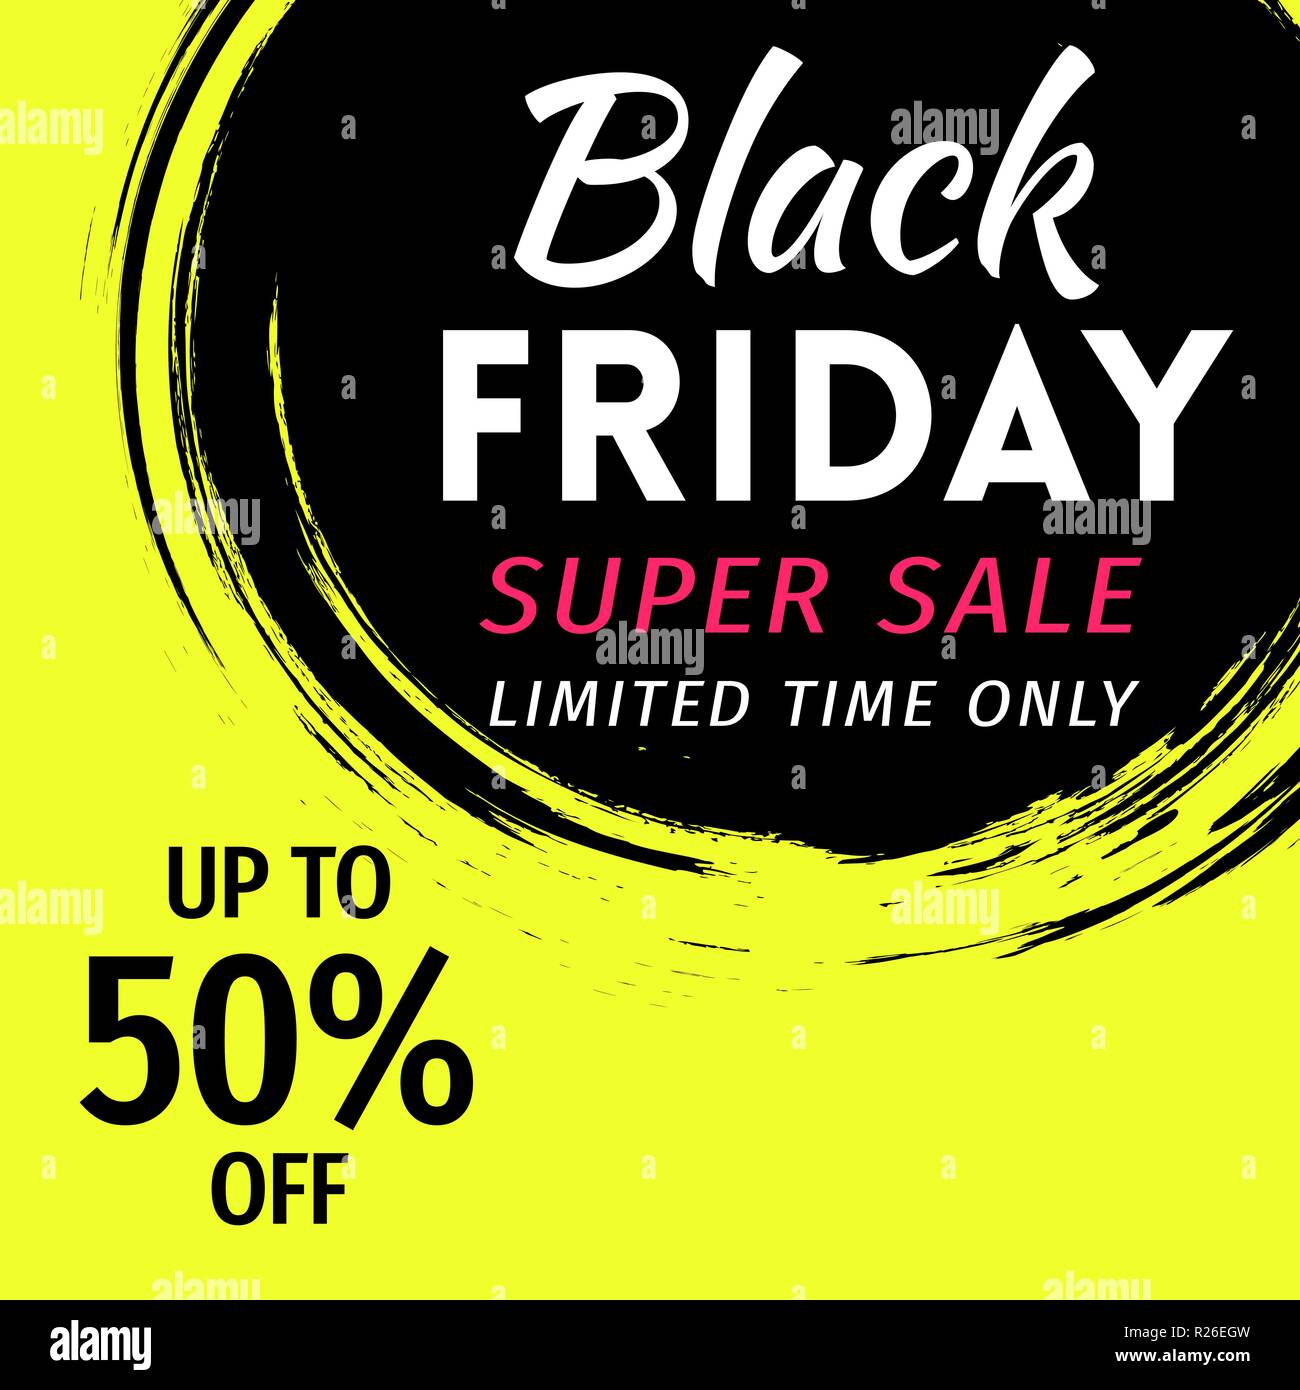 Black Friday sale banner invitation in grunge style Stock Vector